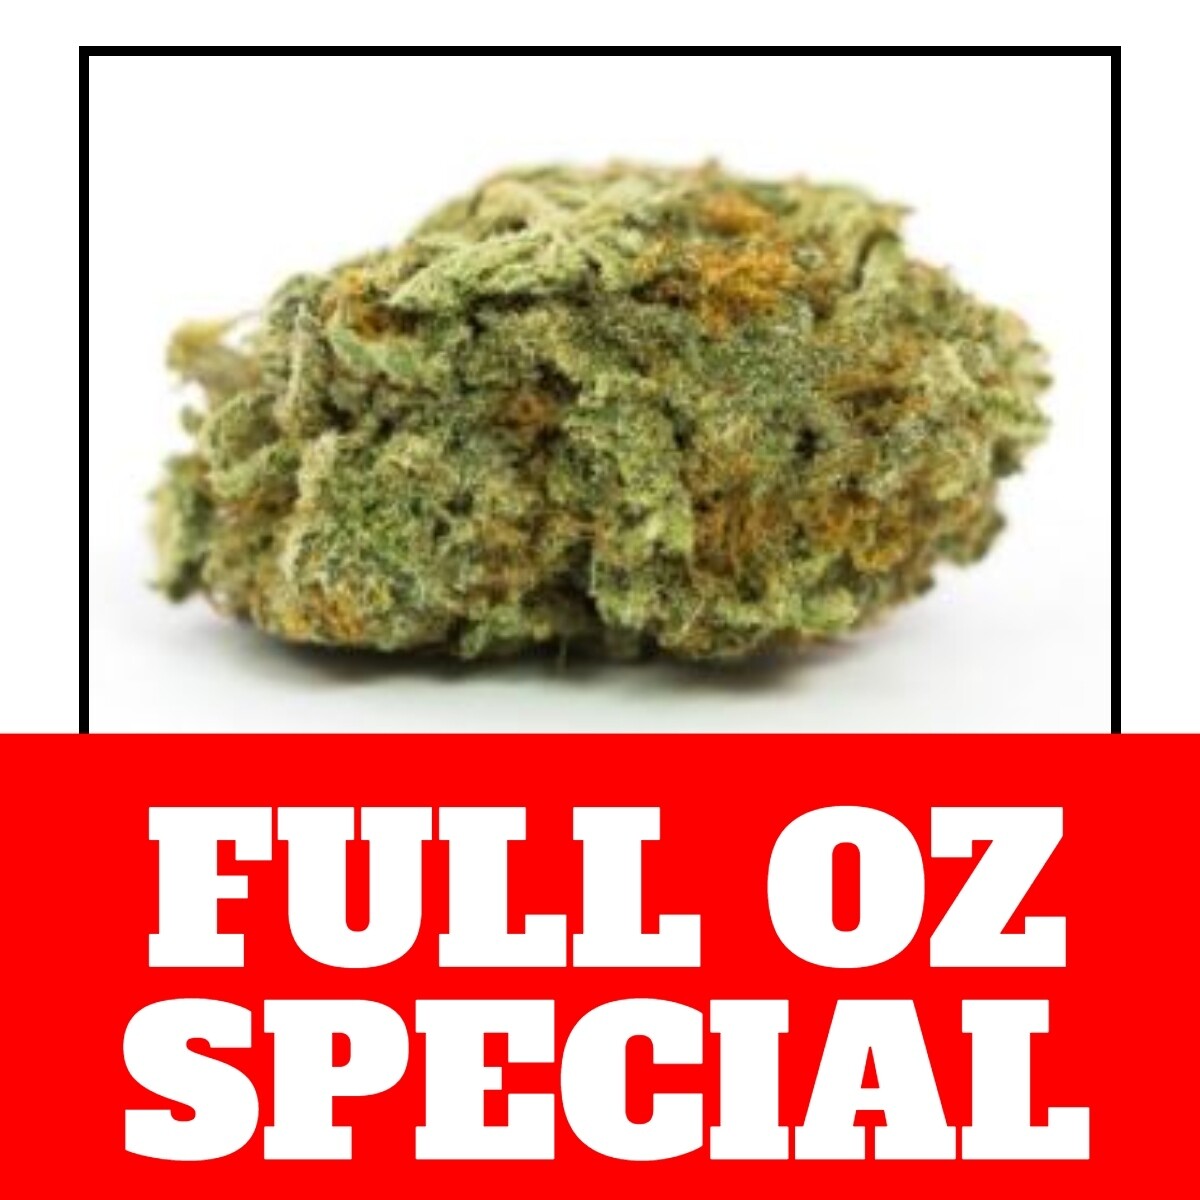 FULL OUNCE SPECIAL! $75 (LIMITED SUPPLIES)